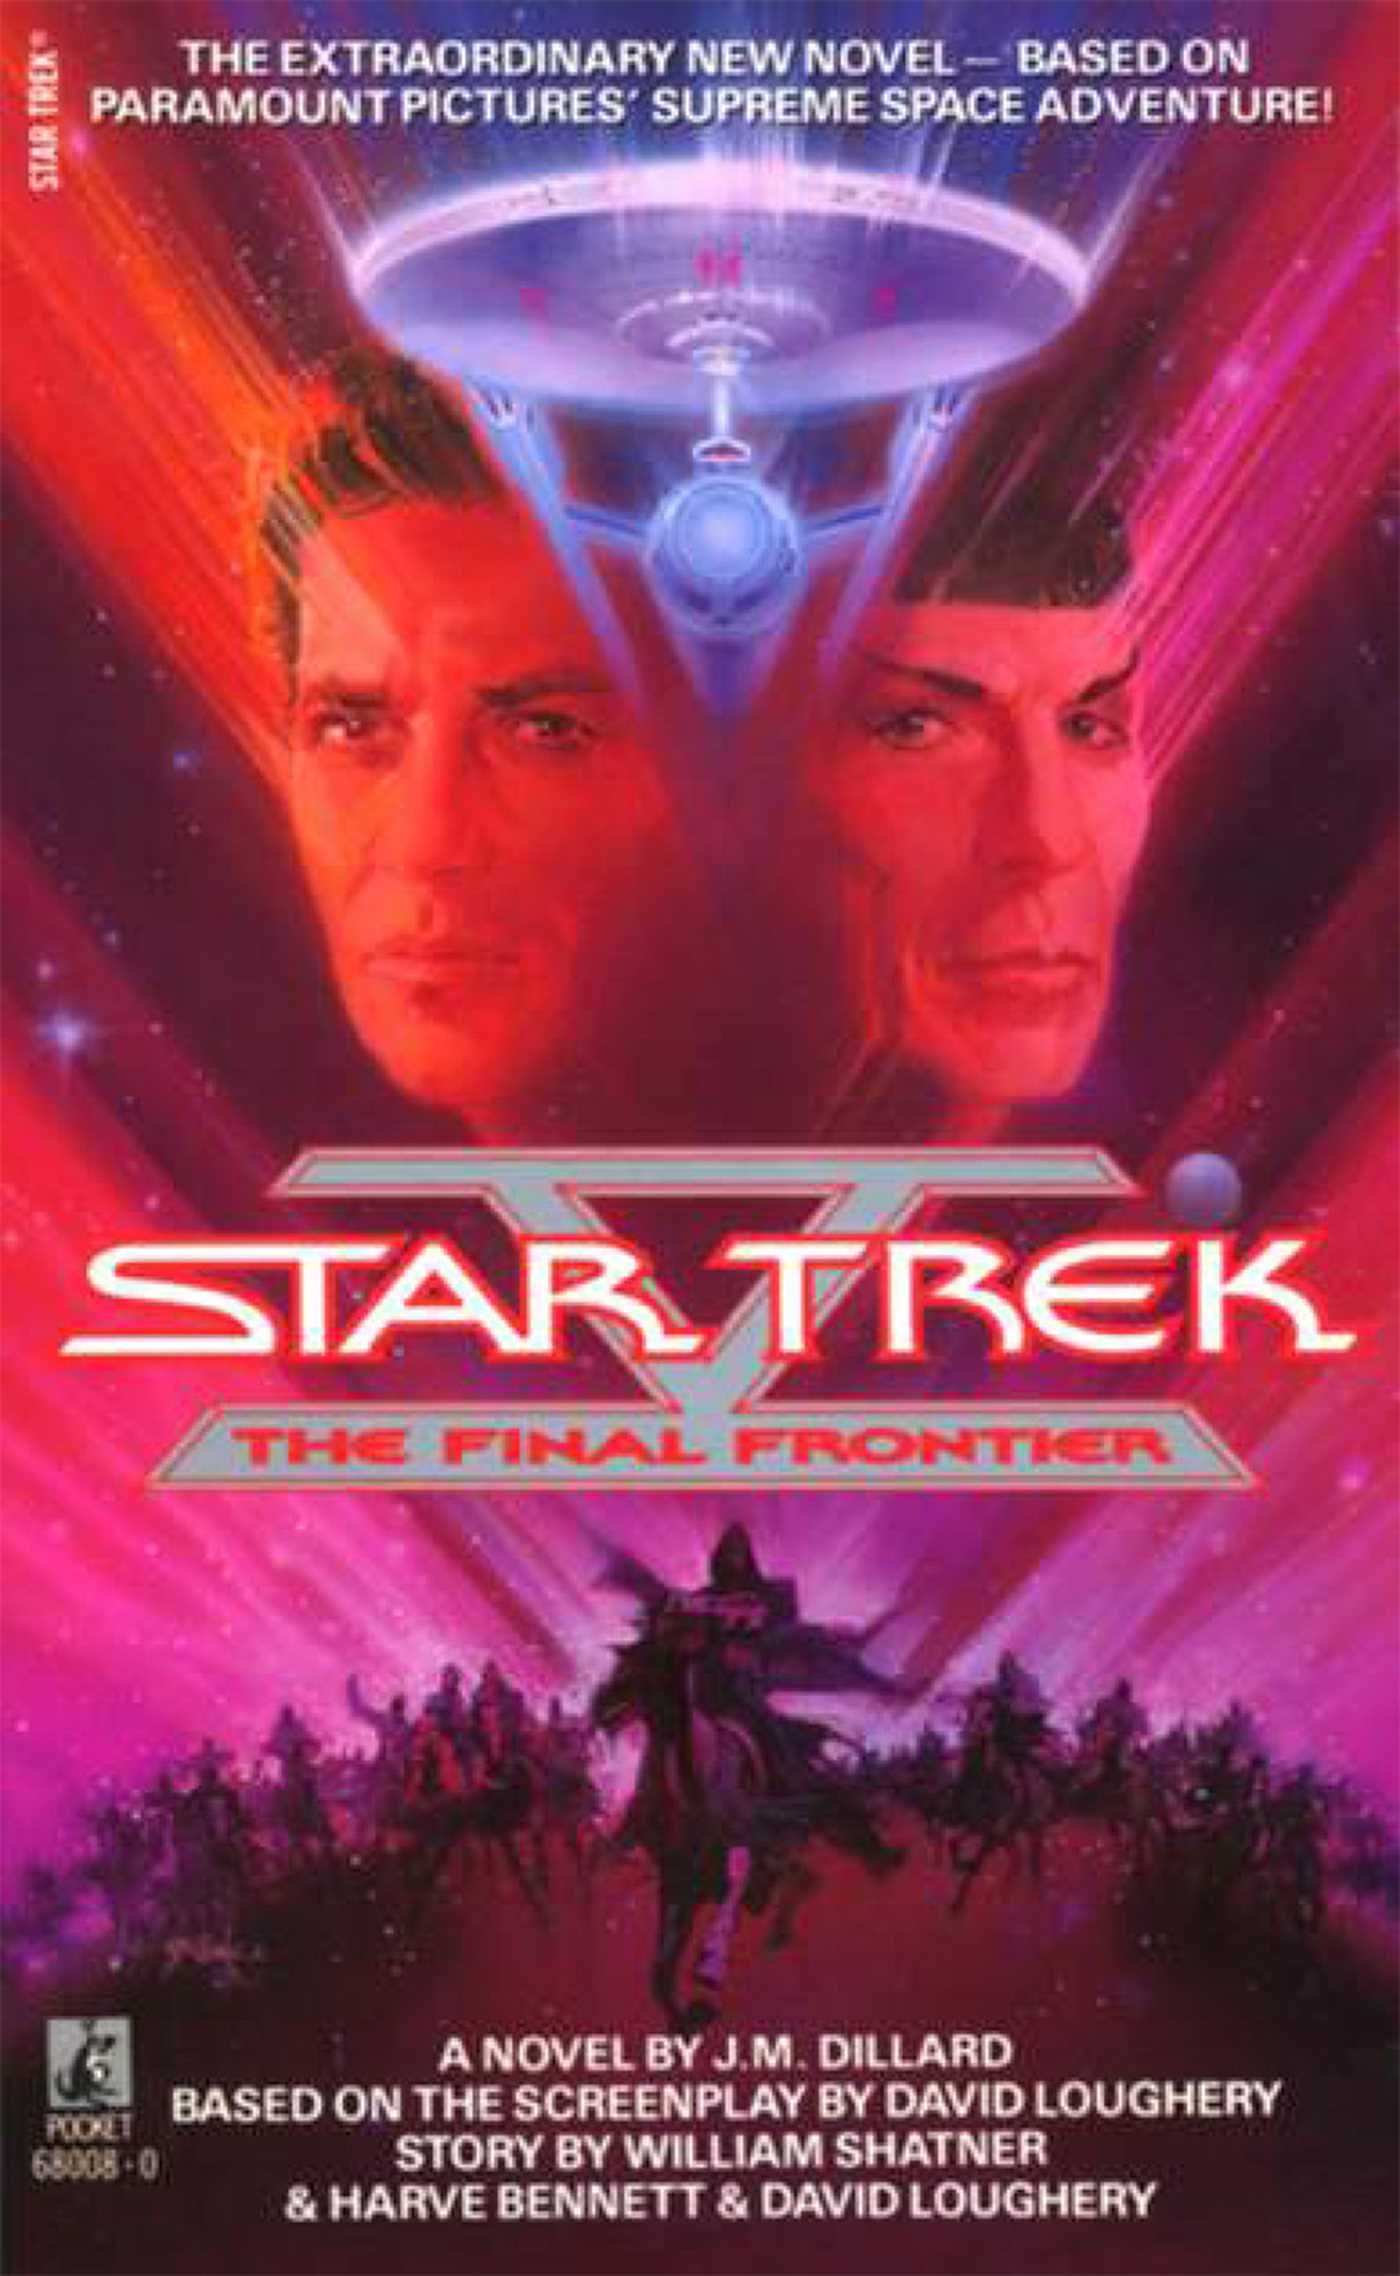 “Star Trek V: The Final Frontier” Review by Themindreels.com